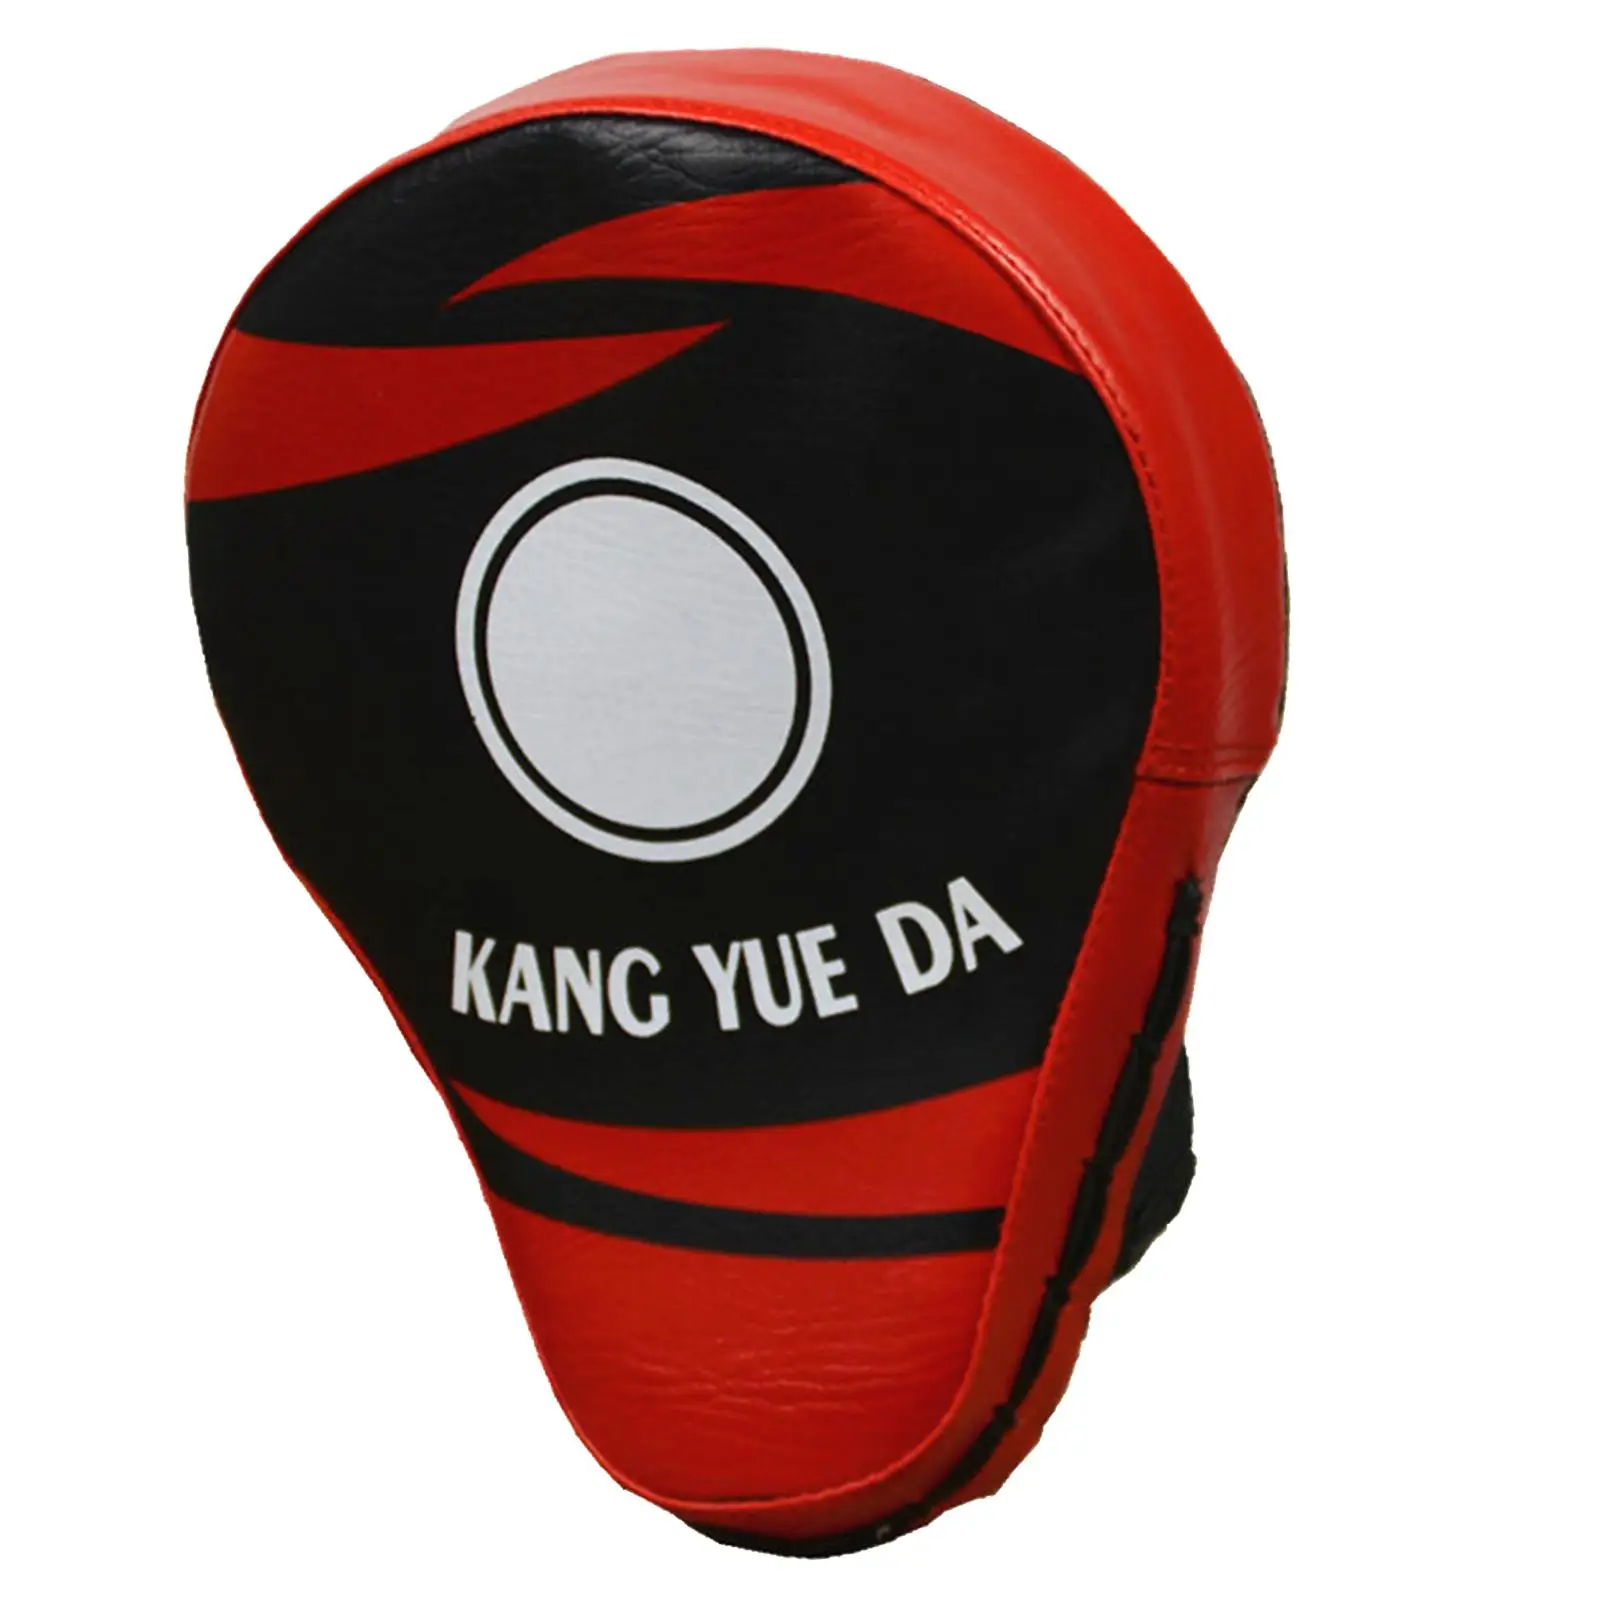 PU Leather Boxing Pads Curved Focus Mitts, Focus Pads Hand Pad Training Shield